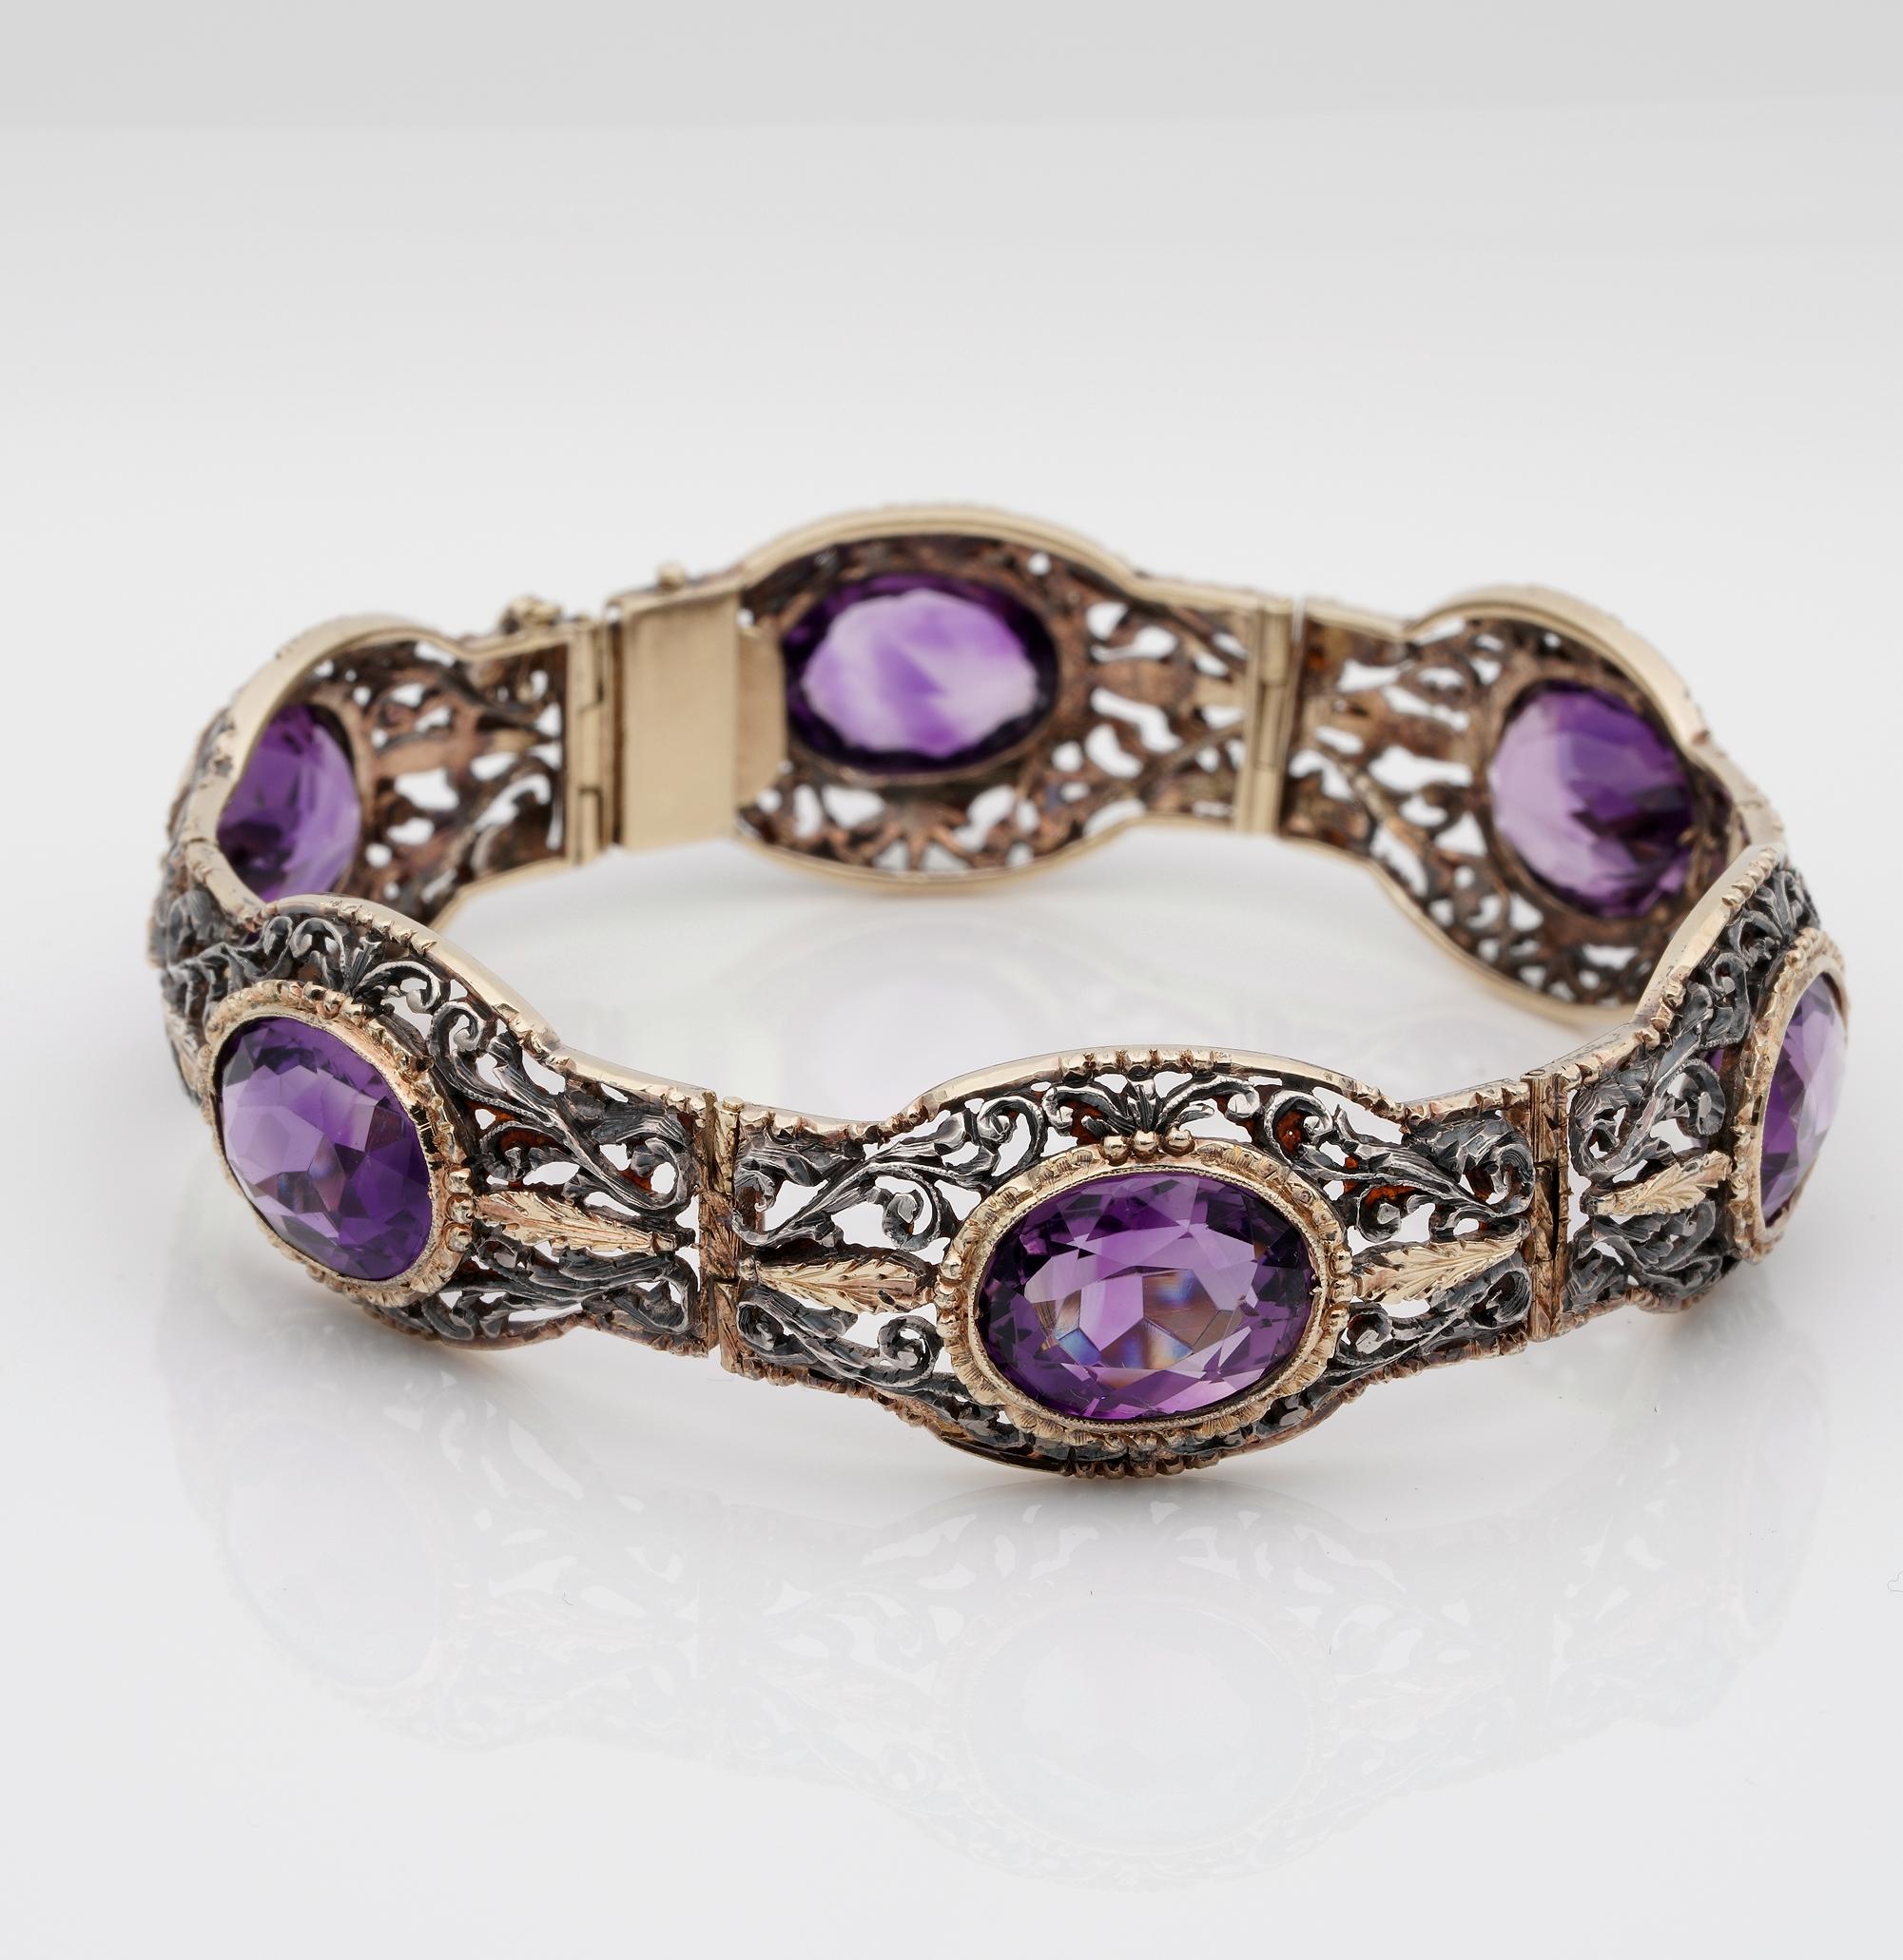 Rare Edwardian 30.0 Carat Natural Siberian Amethyst Masterpiece Bracelet In Good Condition For Sale In Napoli, IT